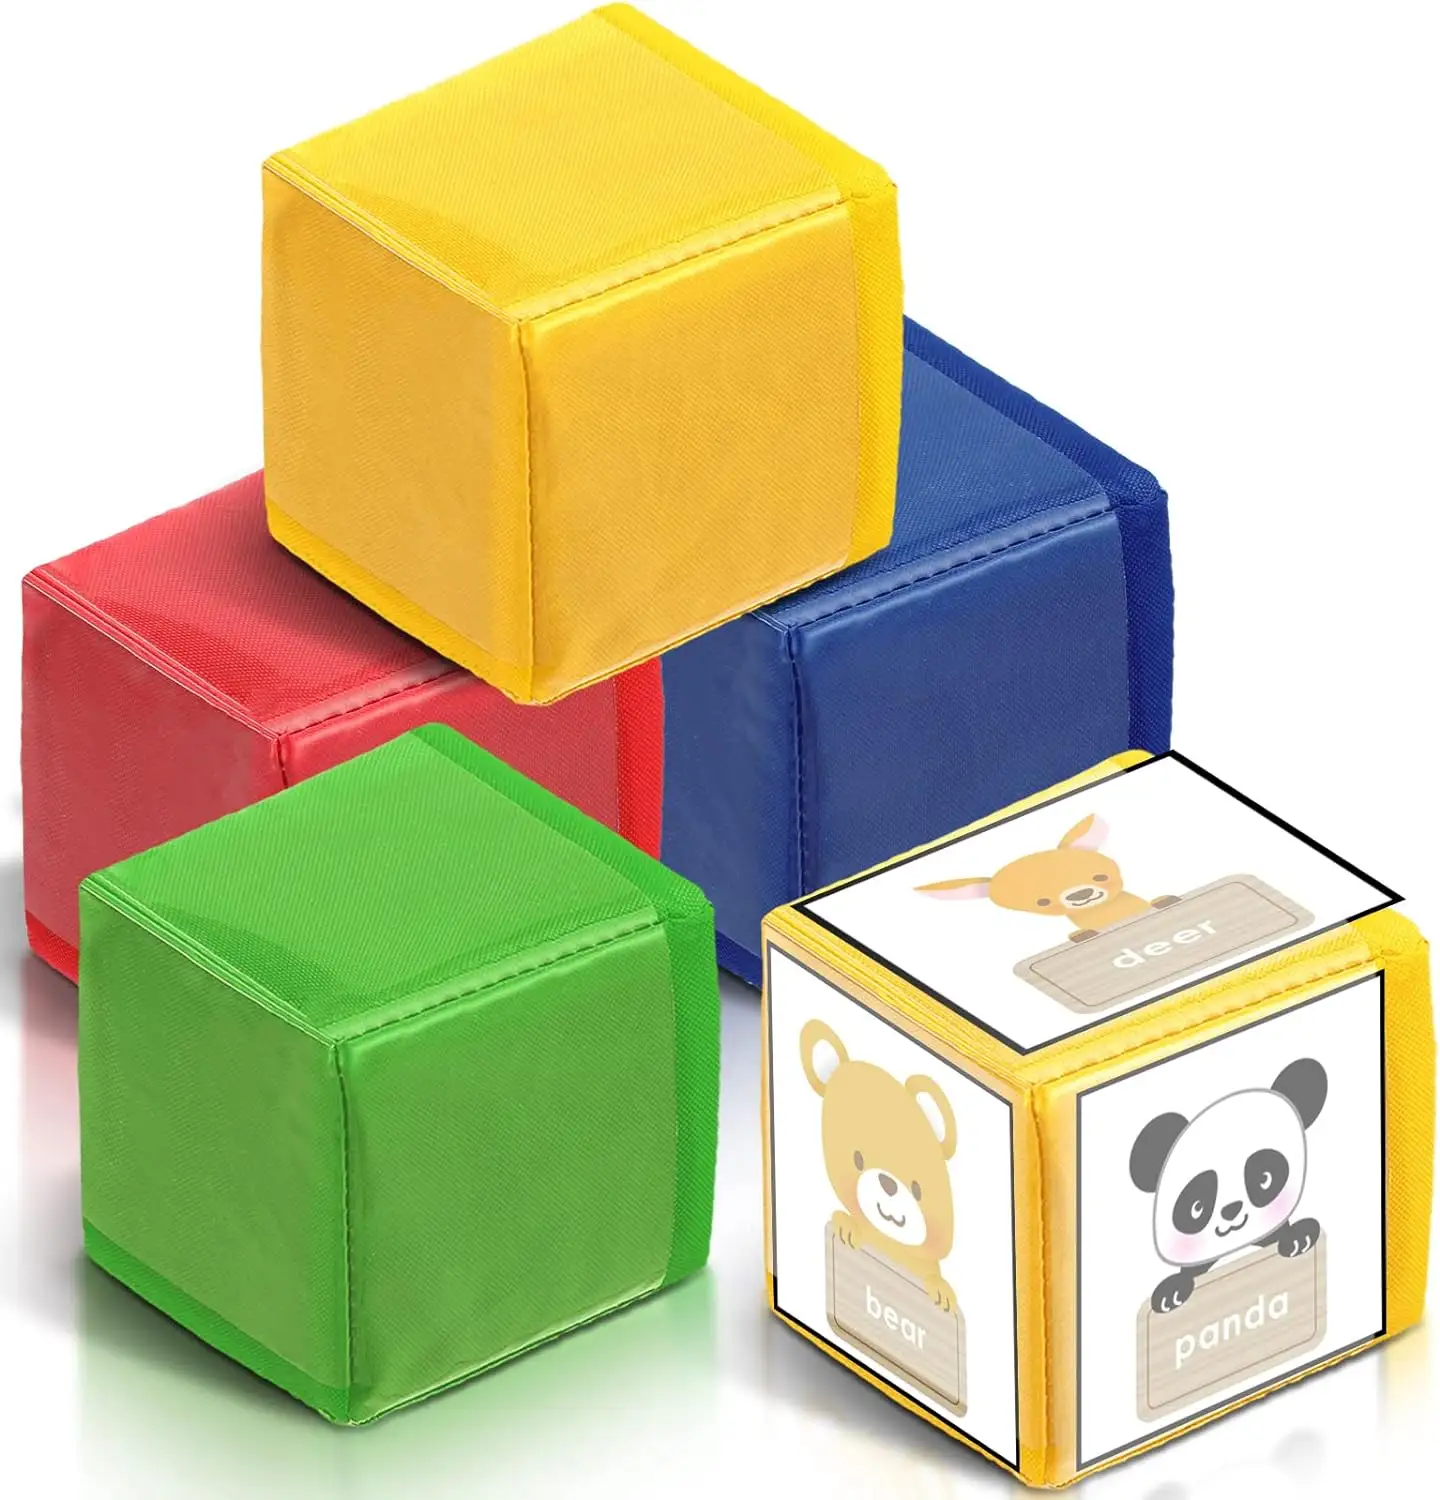 4 Pcs Pocket Dice Education Playing Game Dice Number Color Alphabet DIY Photo Soft Pocket Cubes for Classroom Education Toys